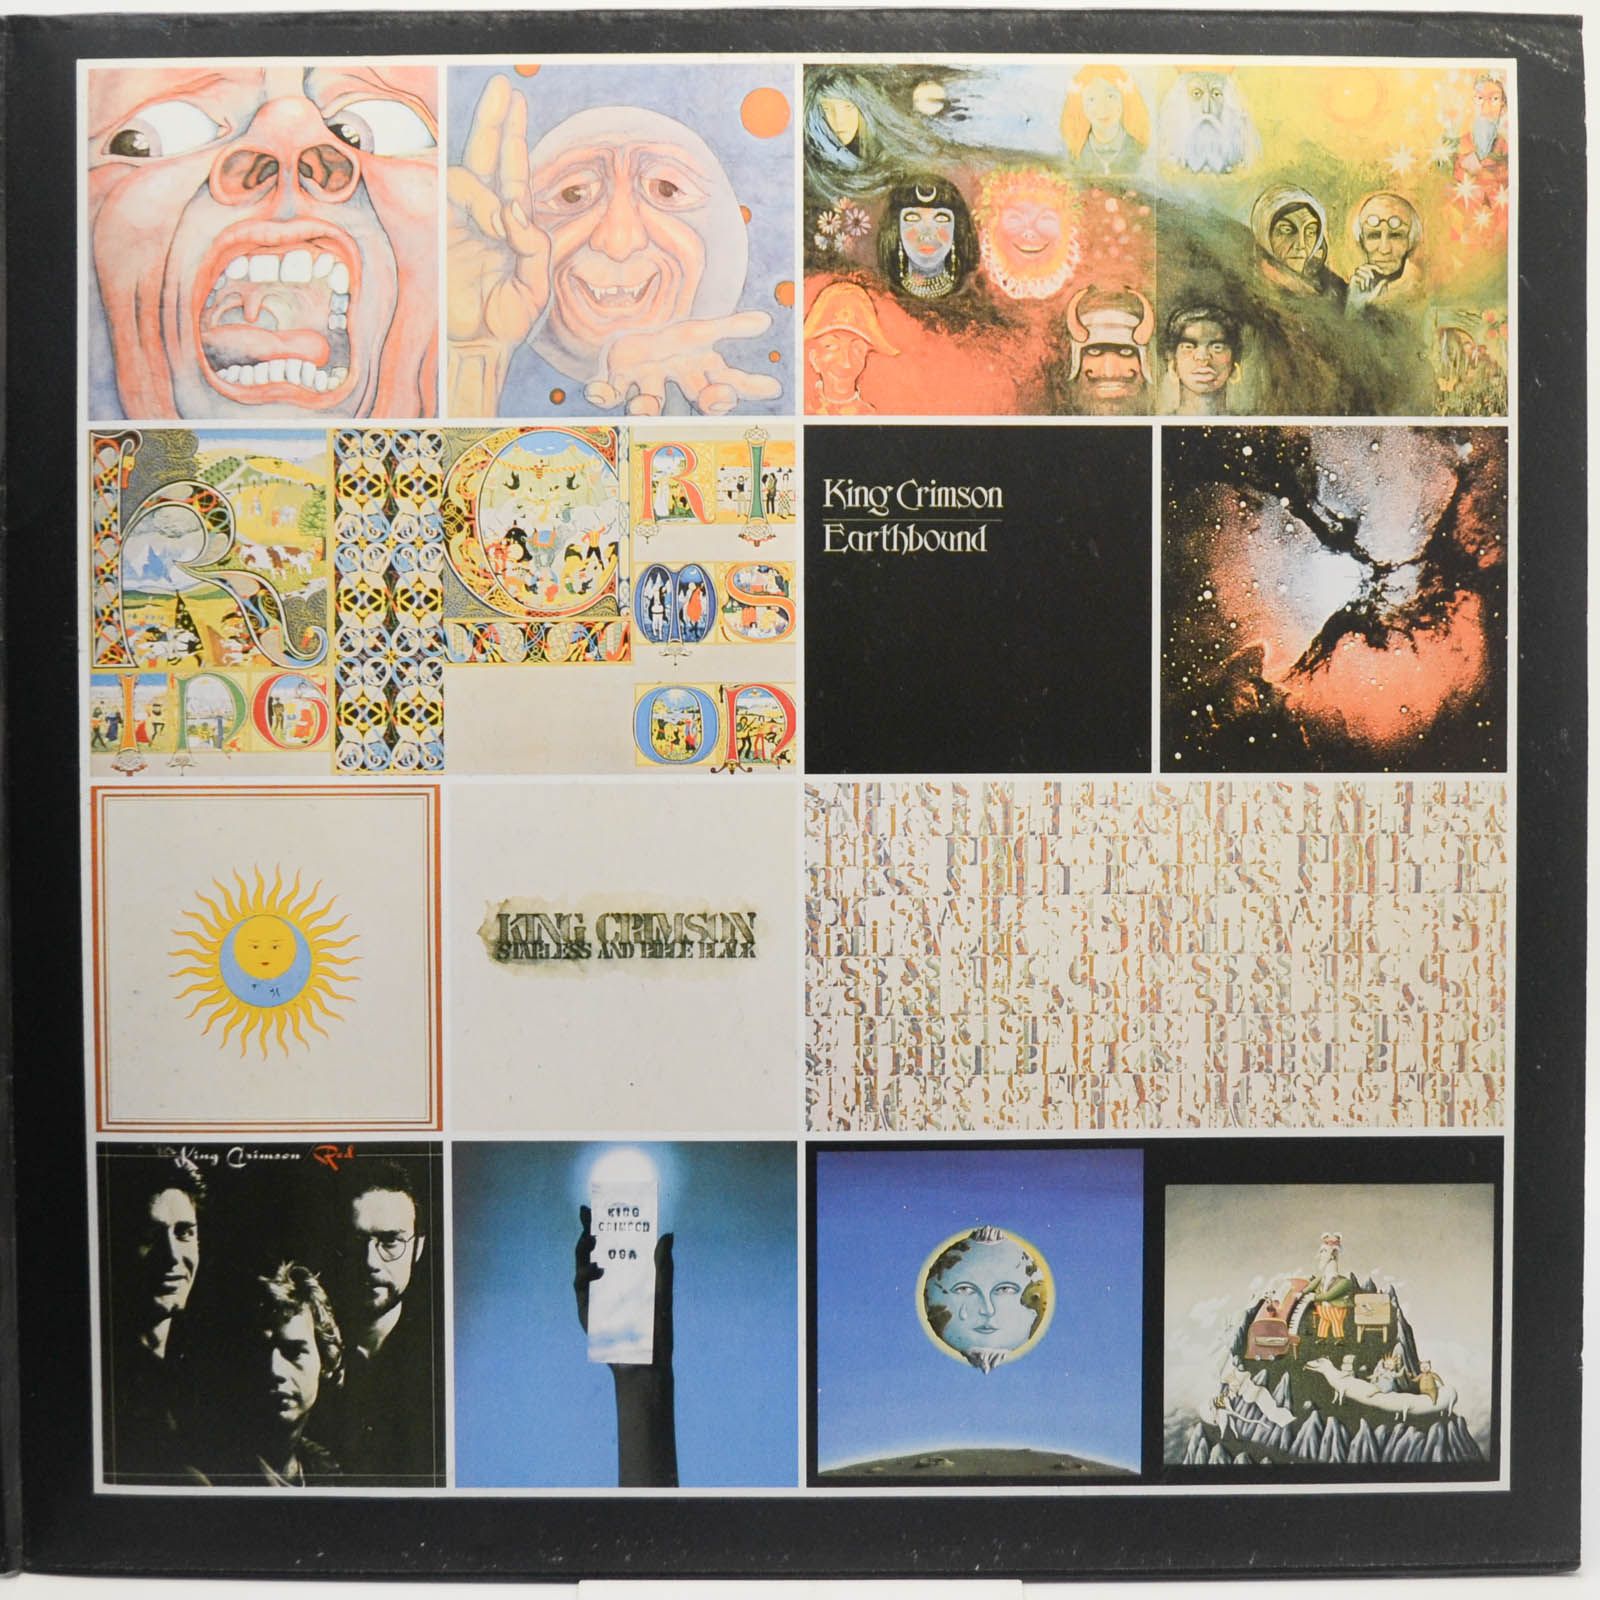 King Crimson — The Young Persons' Guide To King Crimson (2LP), 1975